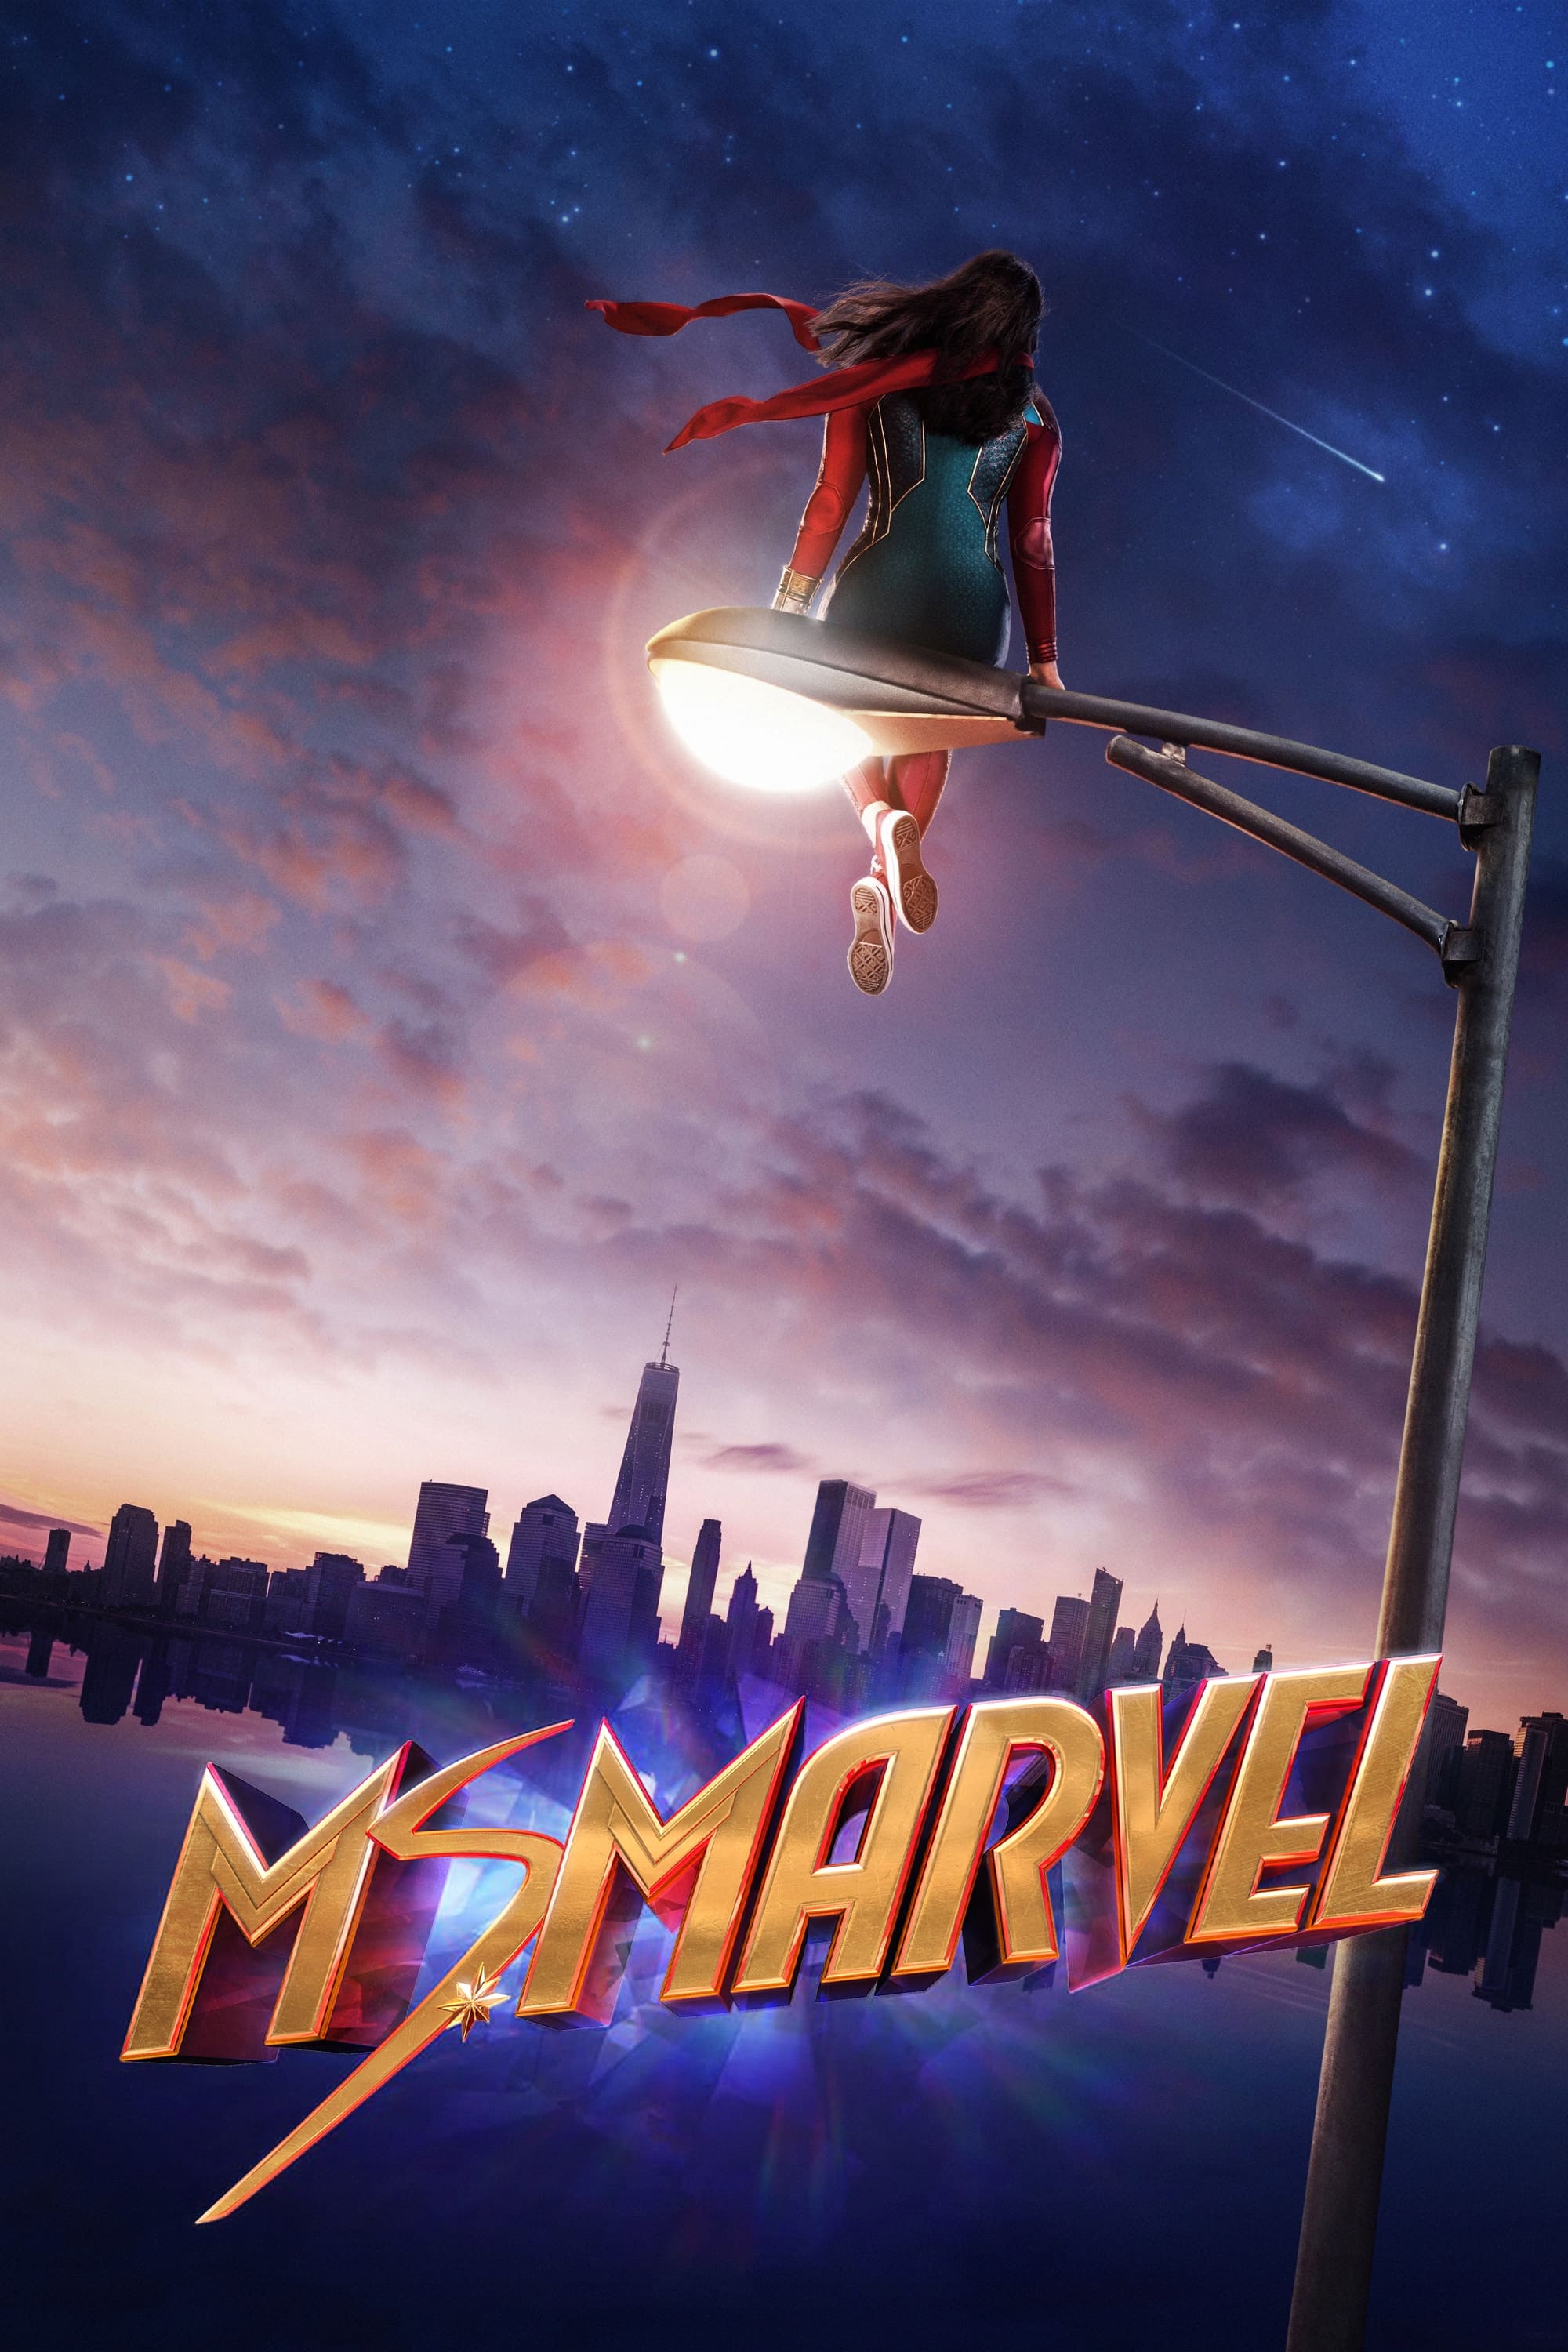 Ms. Marvel TV Shows About Superhero